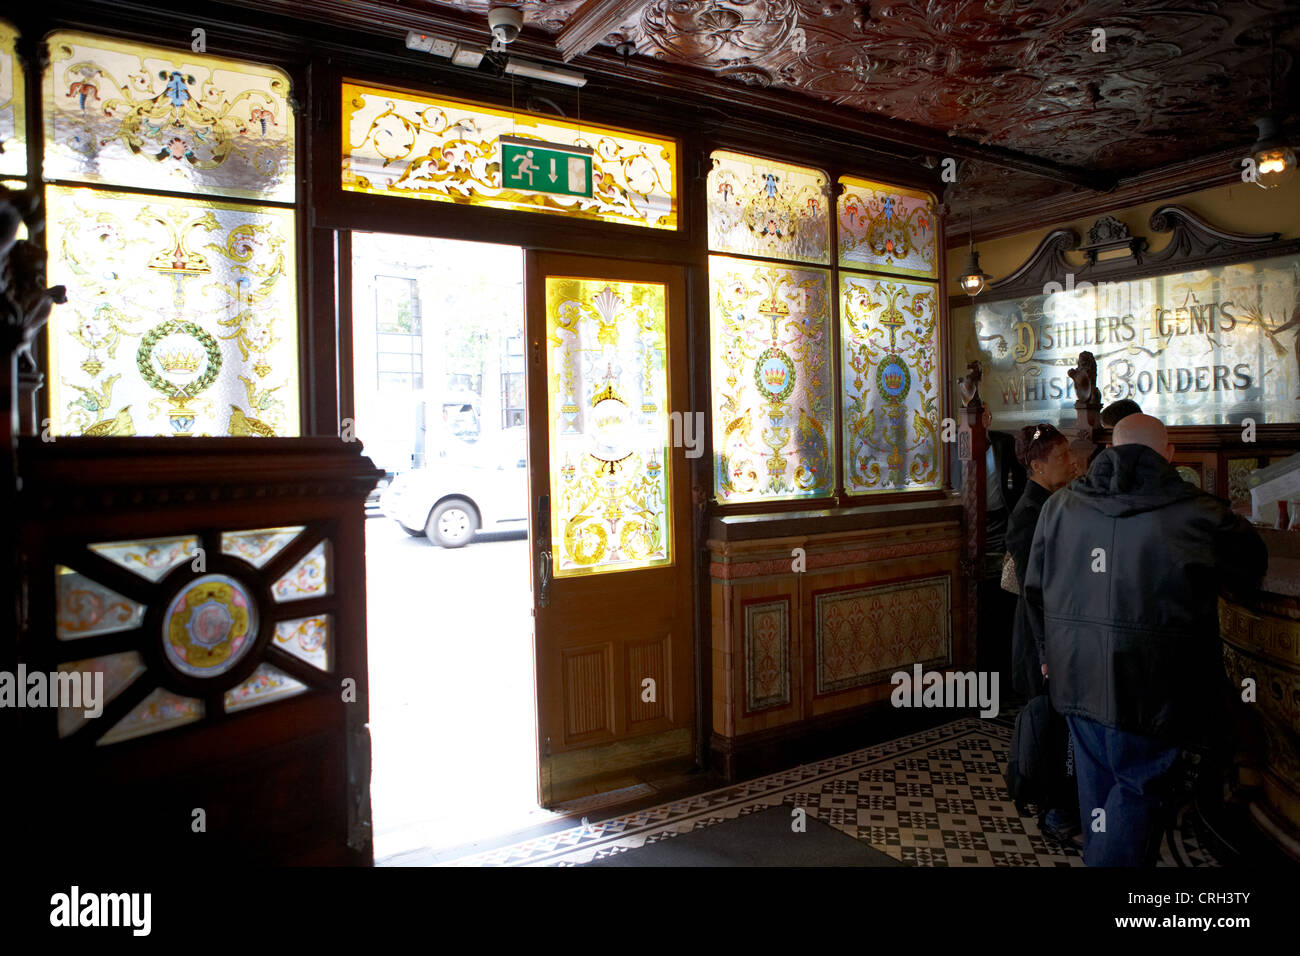 stained glass windows interior of the crown liquor saloon bar pub in belfast northern ireland uk Stock Photo